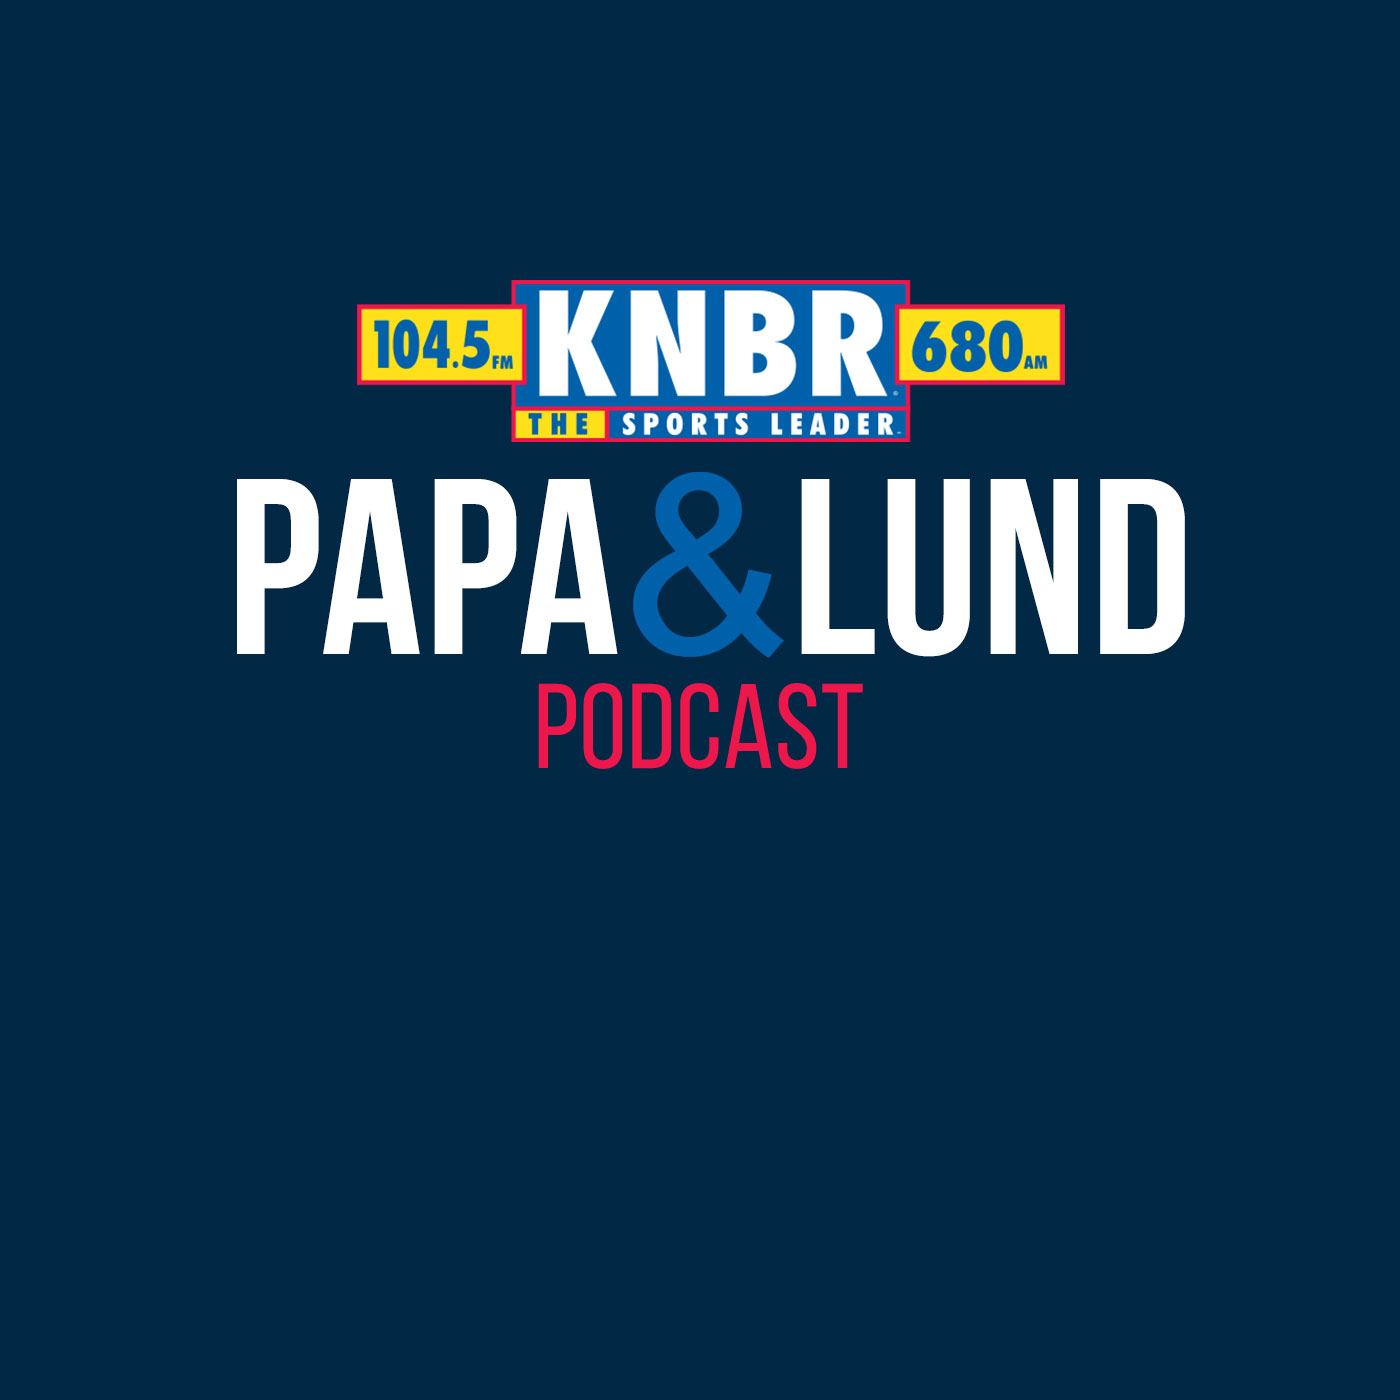 4-25 David Lombardi joins Papa & Lund to discuss the current 49ers roster construction, Trey Lance rumors and what needs the 49ers may try to address in the Draft